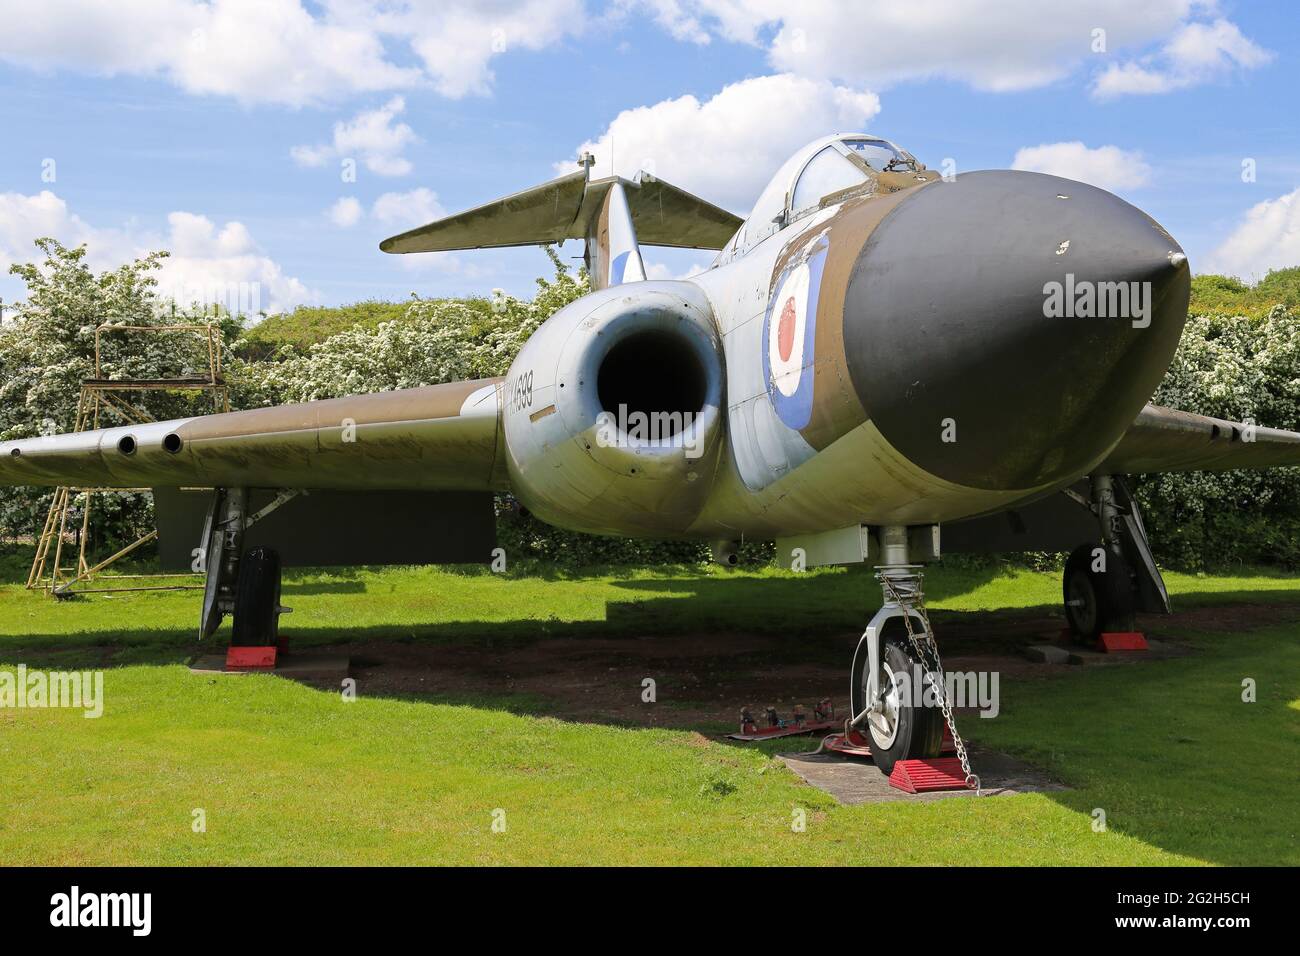 Gloster Javelin FAW.5 (1951), Midland Air Museum, aéroport de Coventry, Baginton, Warwickshire, Angleterre, Grande-Bretagne, Royaume-Uni, Europe Banque D'Images